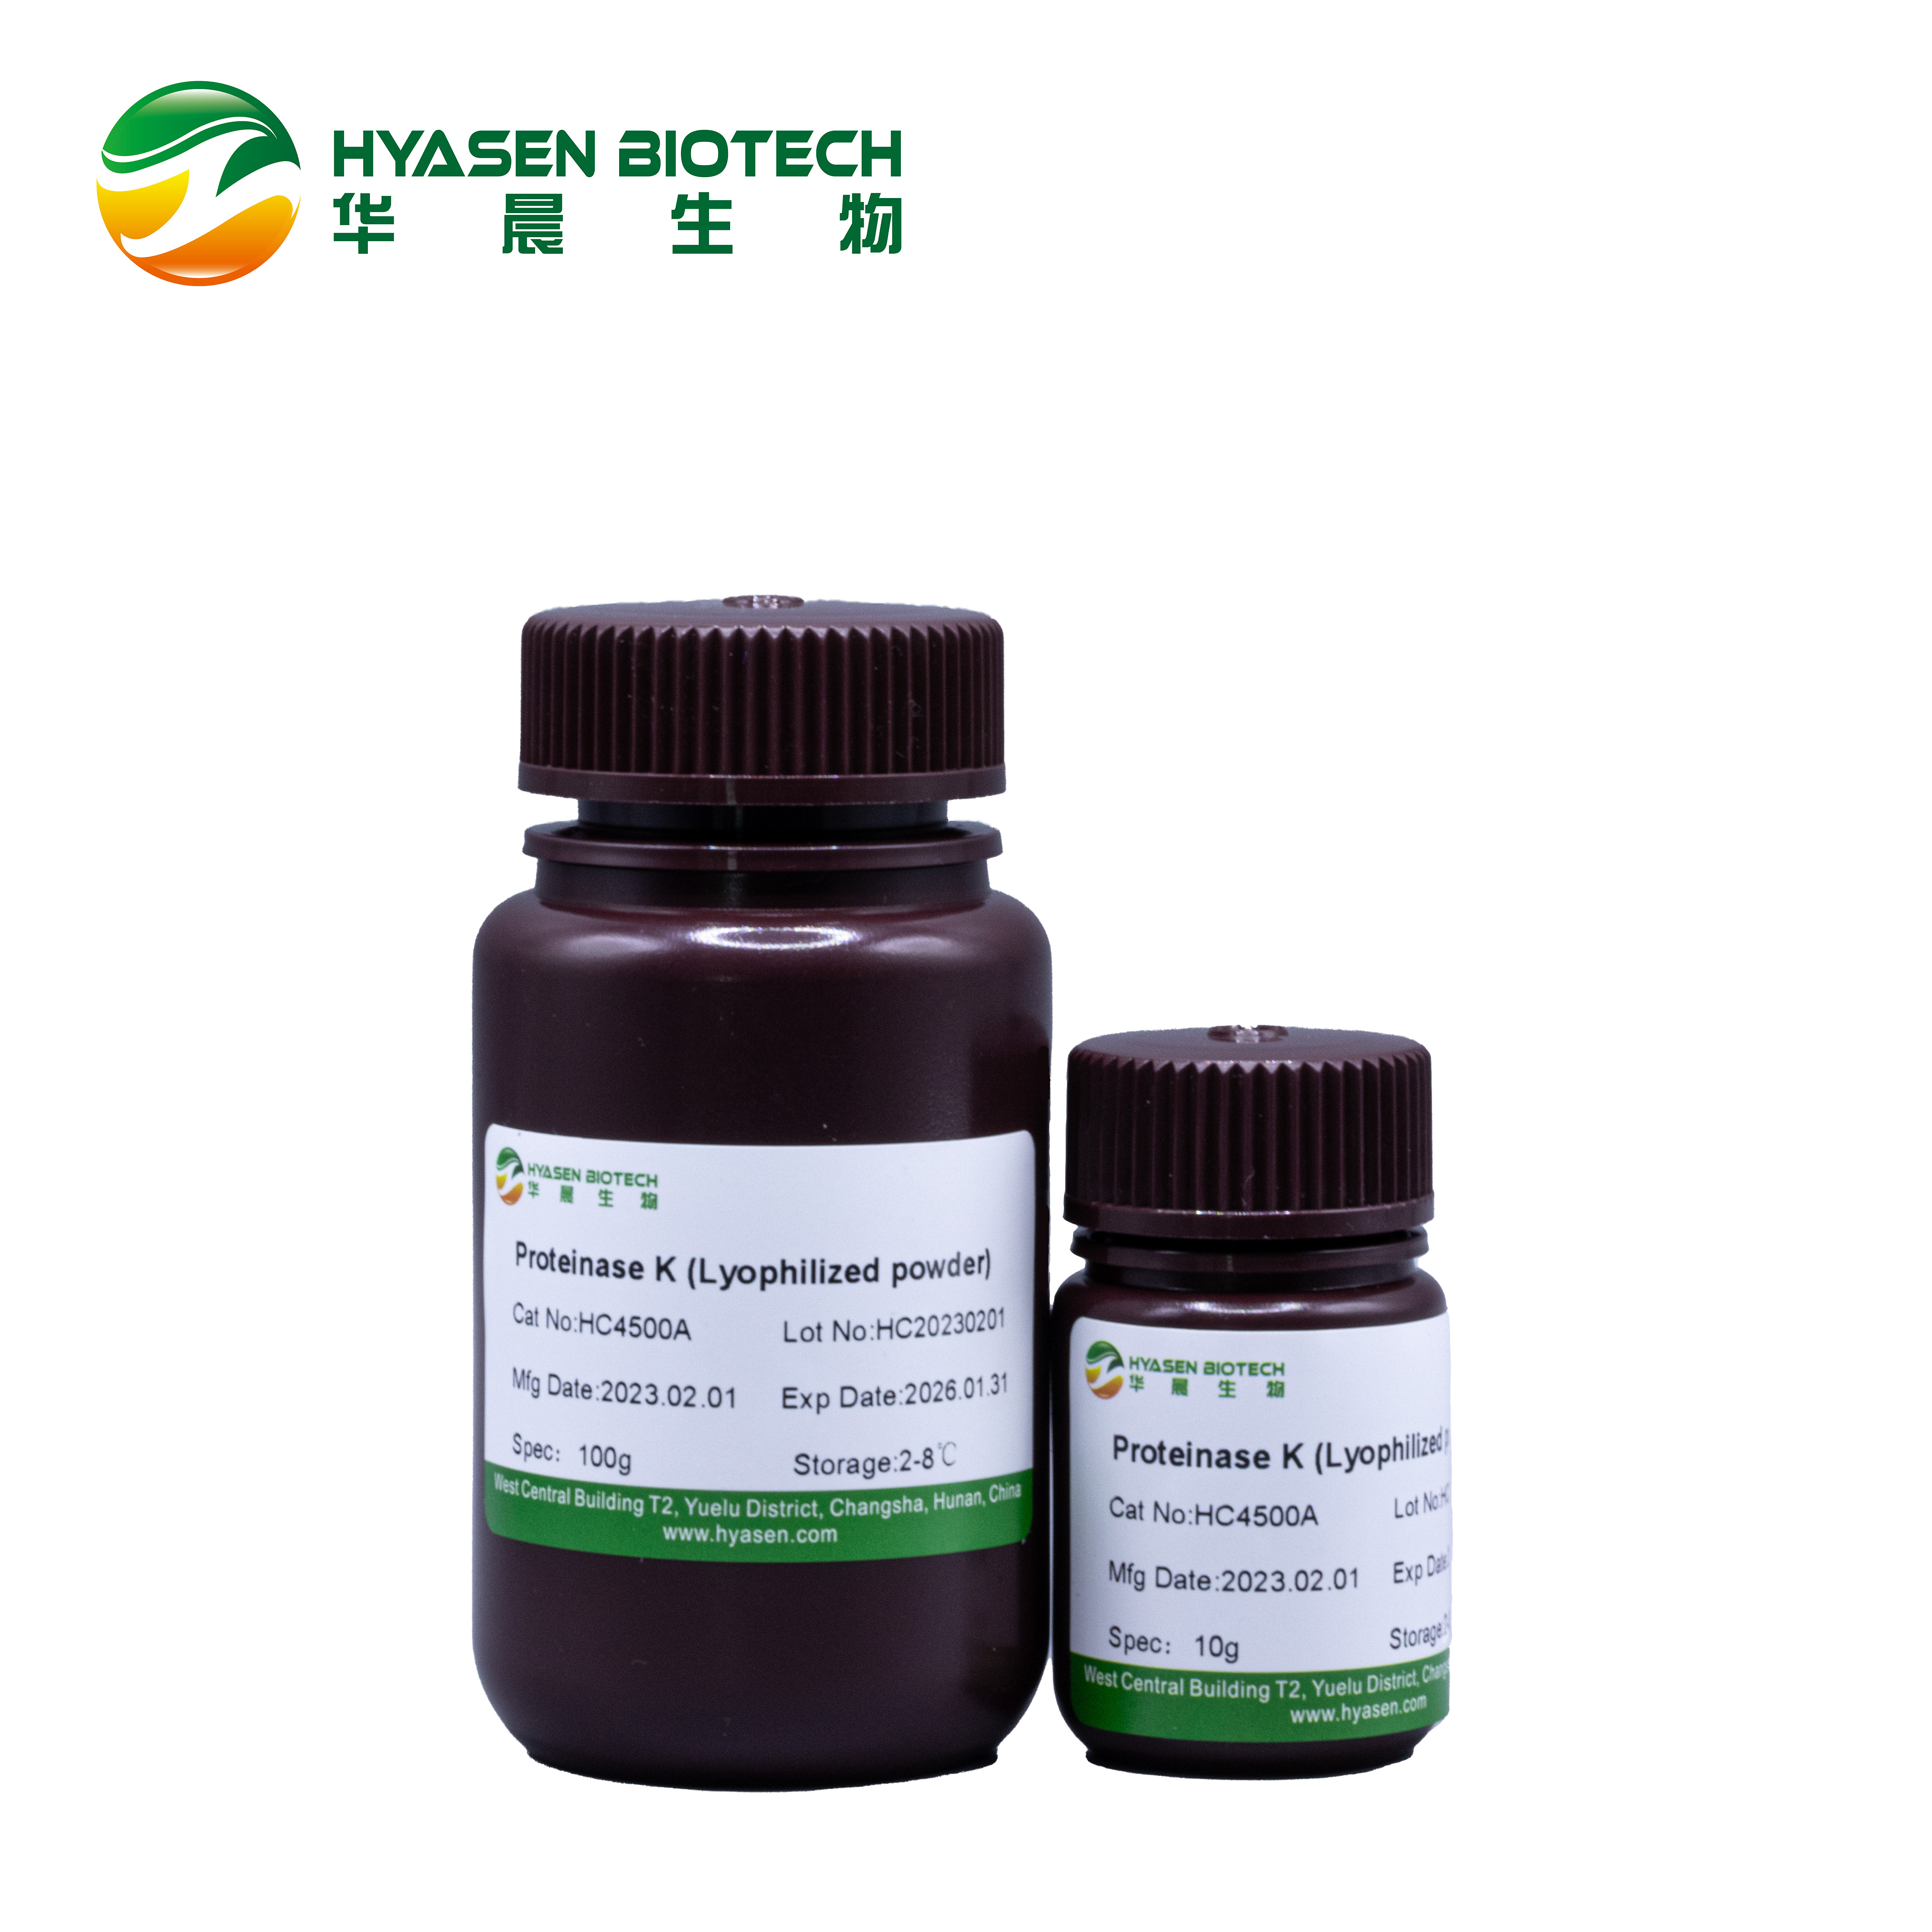 Proteinase K (Lyophilized پوډر) HC4500A انځور شوی انځور